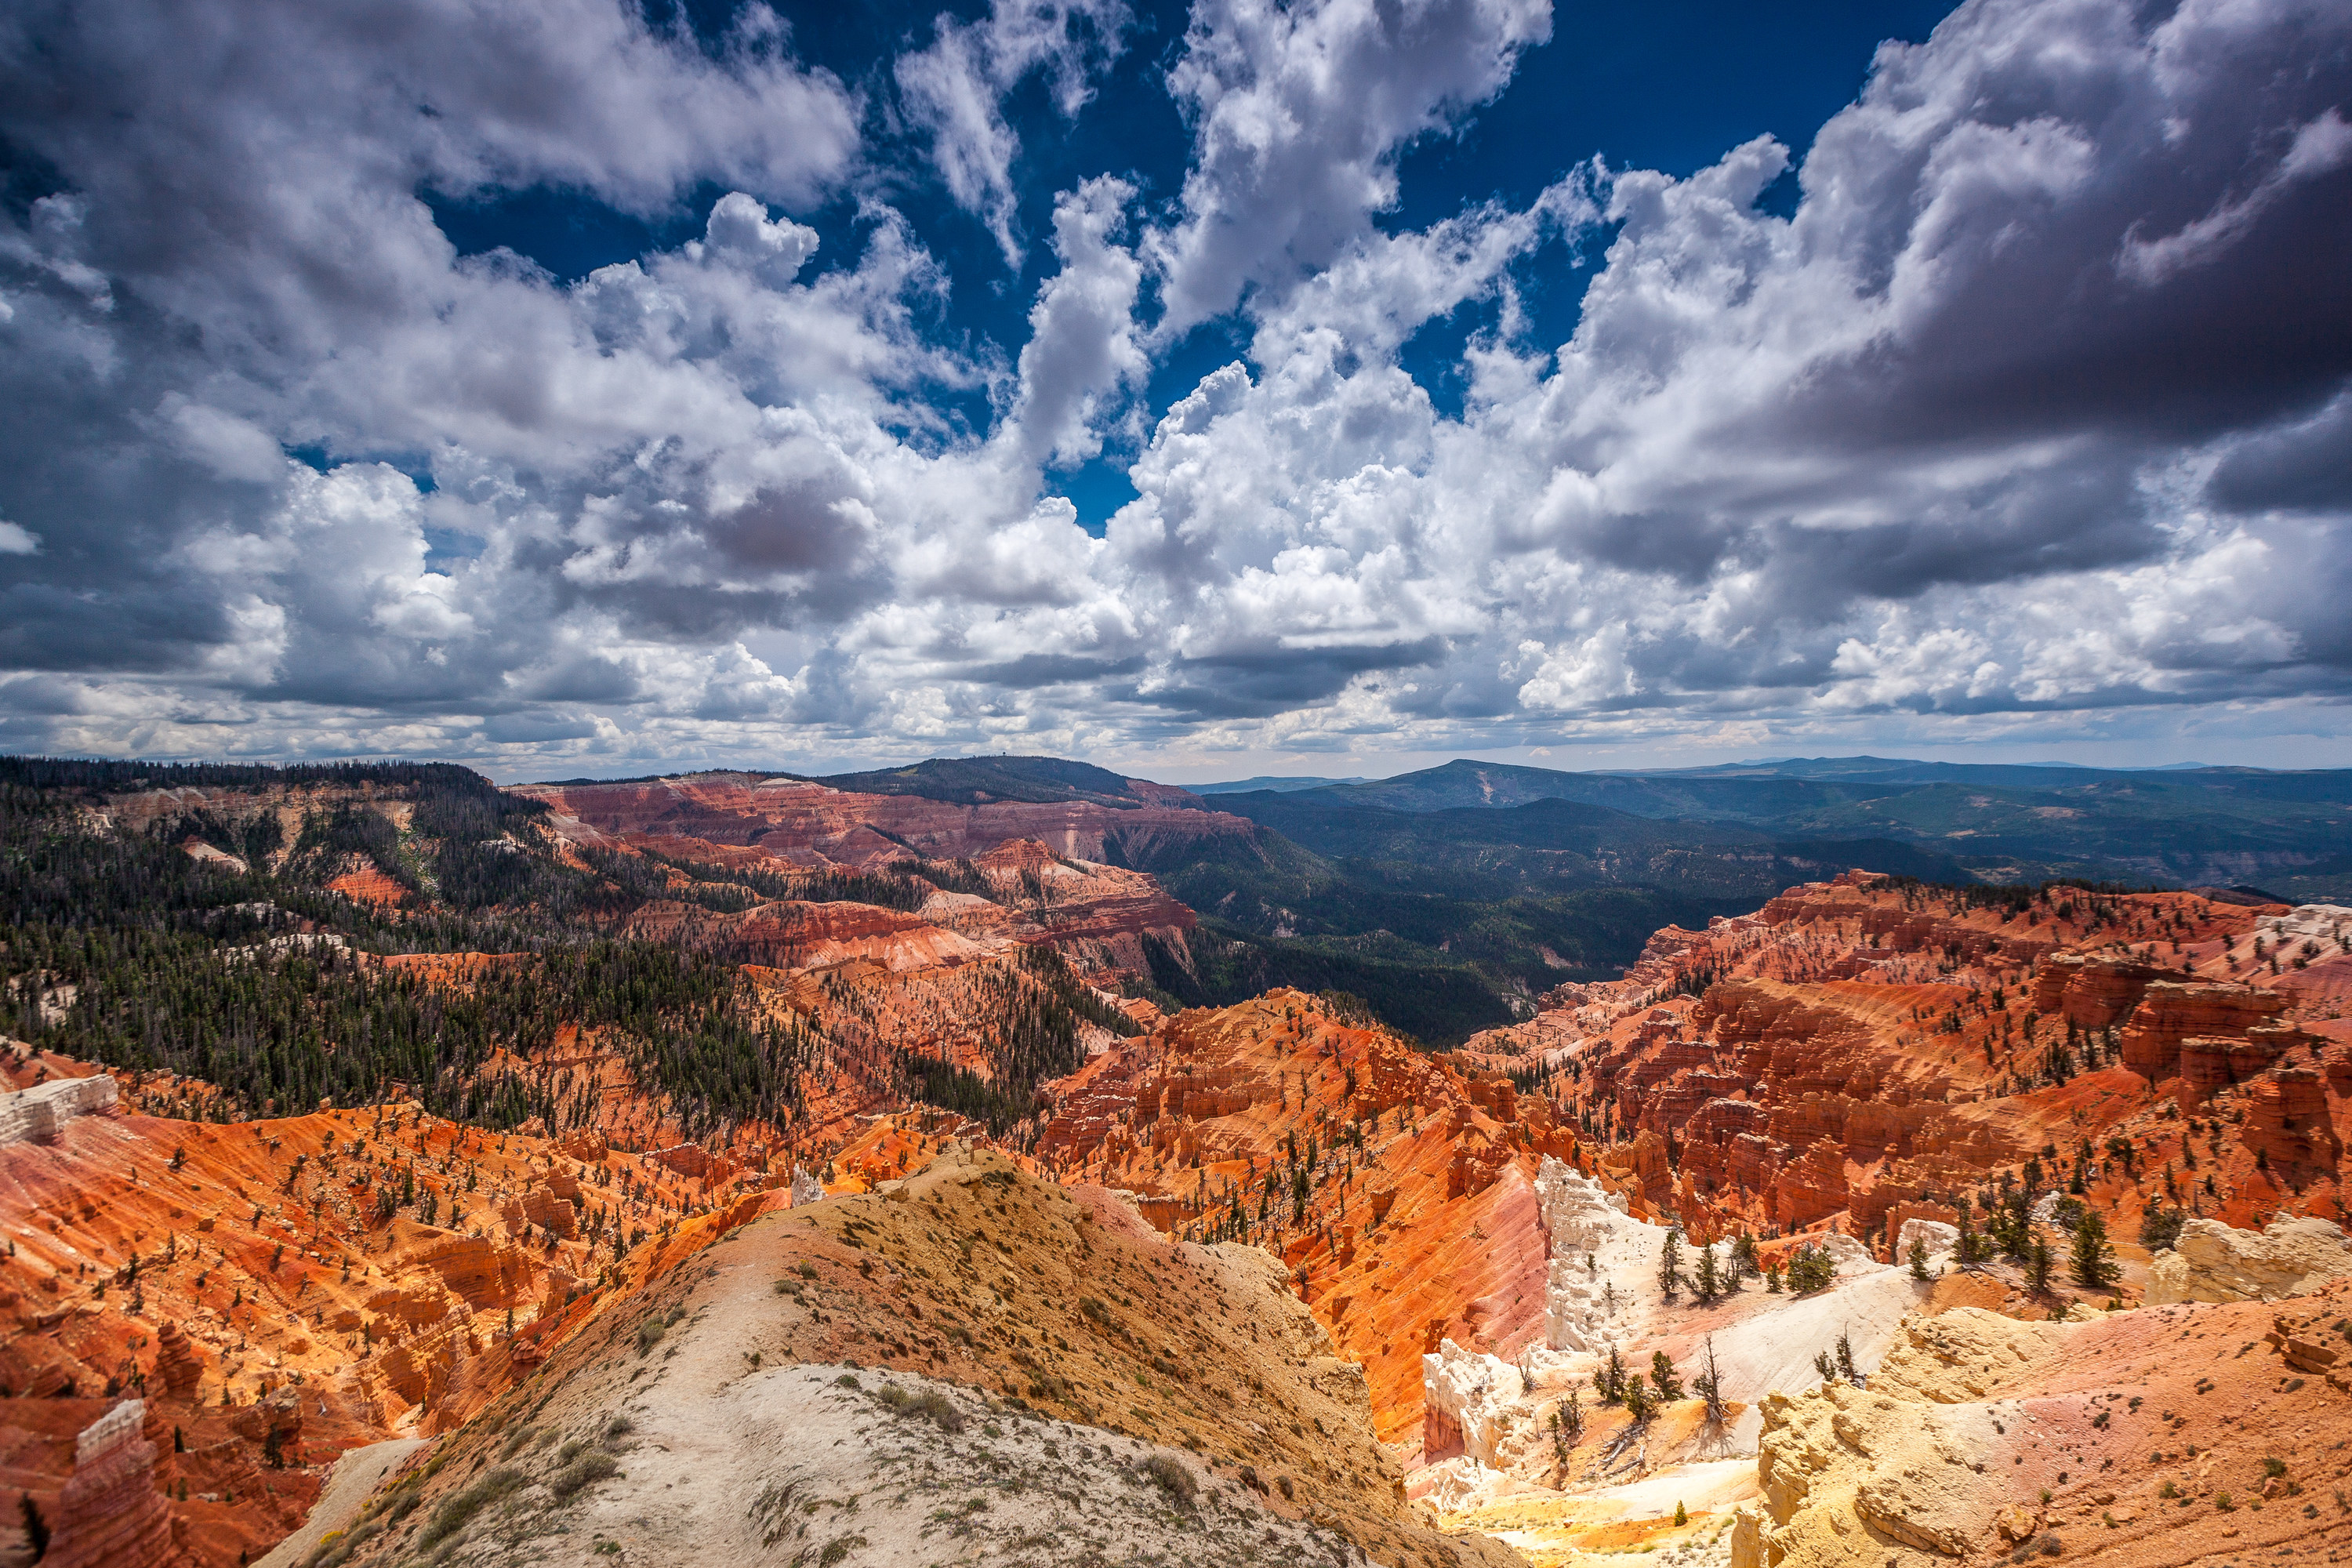 A view from a high point of Cedar Breaks National Monument shows jagged hills and rocks. In the middle, a large geologic amphitheater swoops down